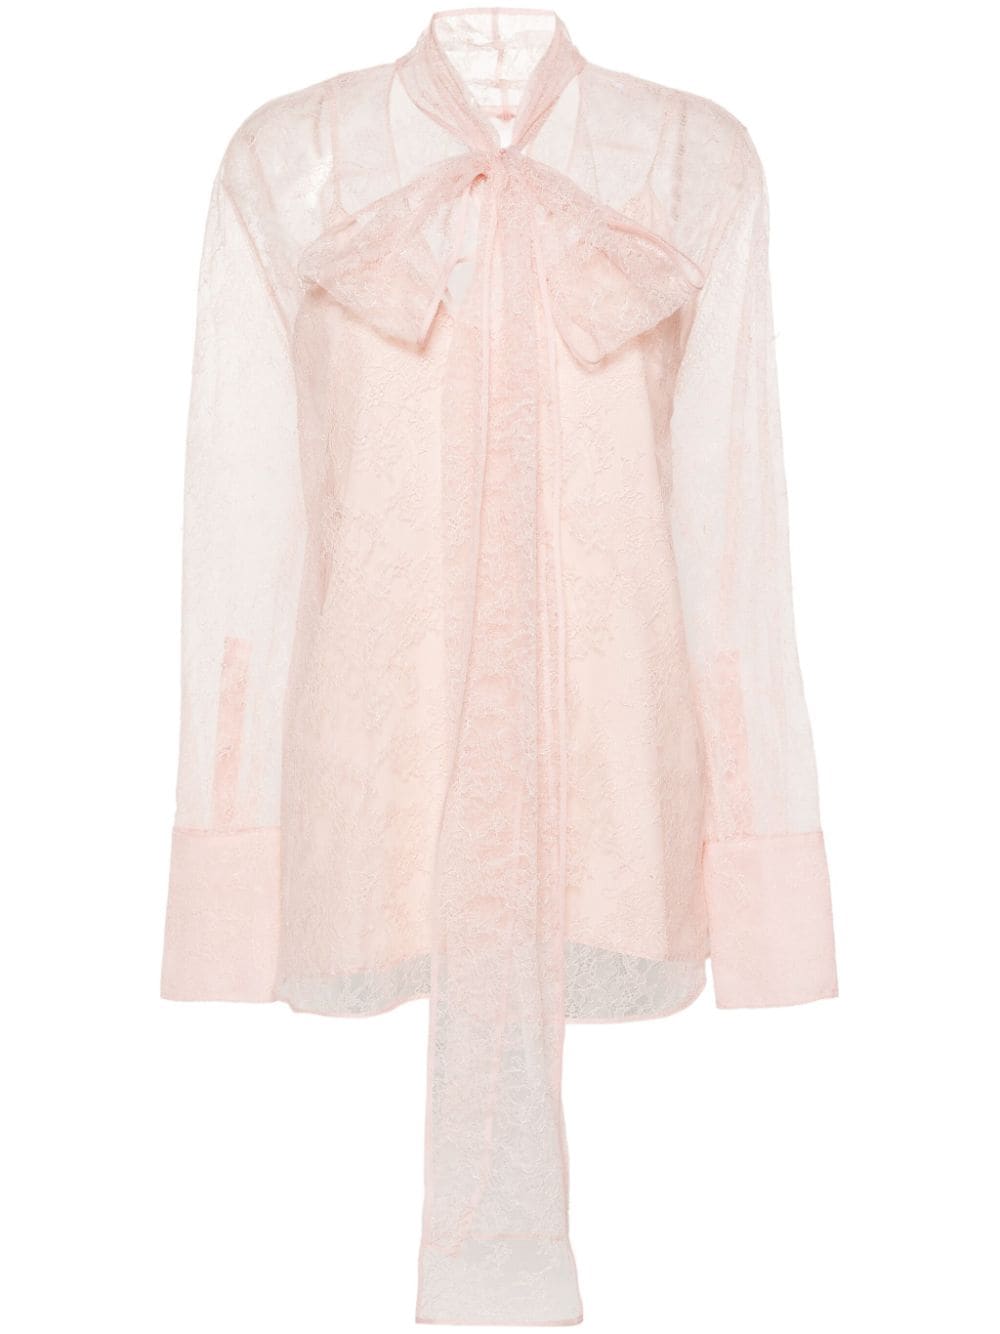 Givenchy sheer lace blouse - Pink von Givenchy